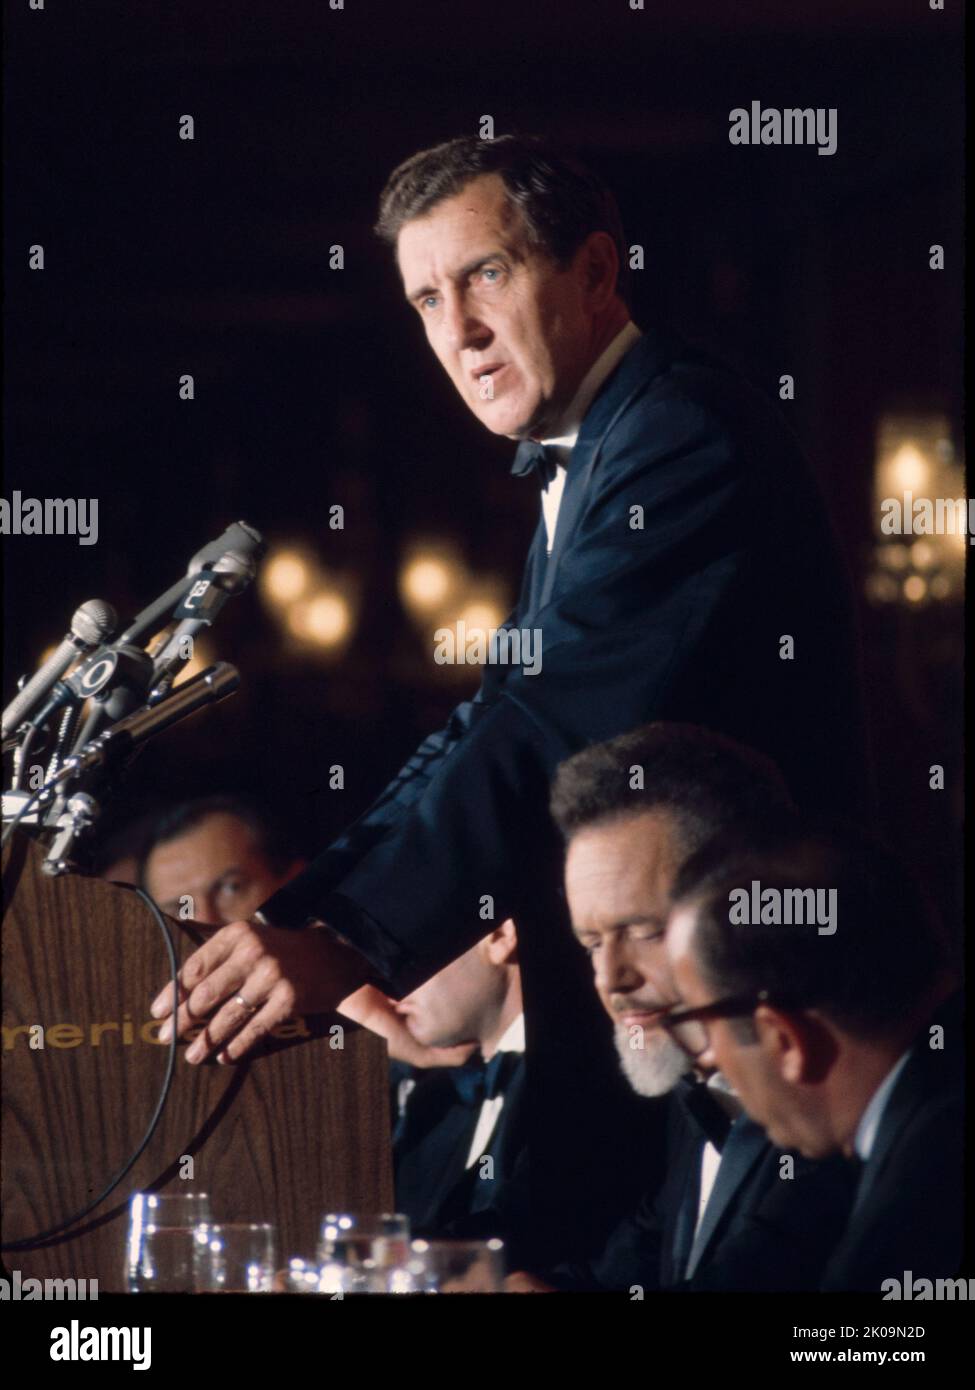 Edmund Muskie (1914 - 1996) American statesman and political leader who served as United States Secretary of State under President Jimmy Carter, a United States Senator from Maine from 1959 to 1980, the 64th Governor of Maine from 1955 to 1959, and a member of the Maine House of Representatives from 1946 to 1951. He was the Democratic Party's candidate for Vice President of the United States in the 1968 presidential election, alongside Hubert Humphrey. Stock Photo